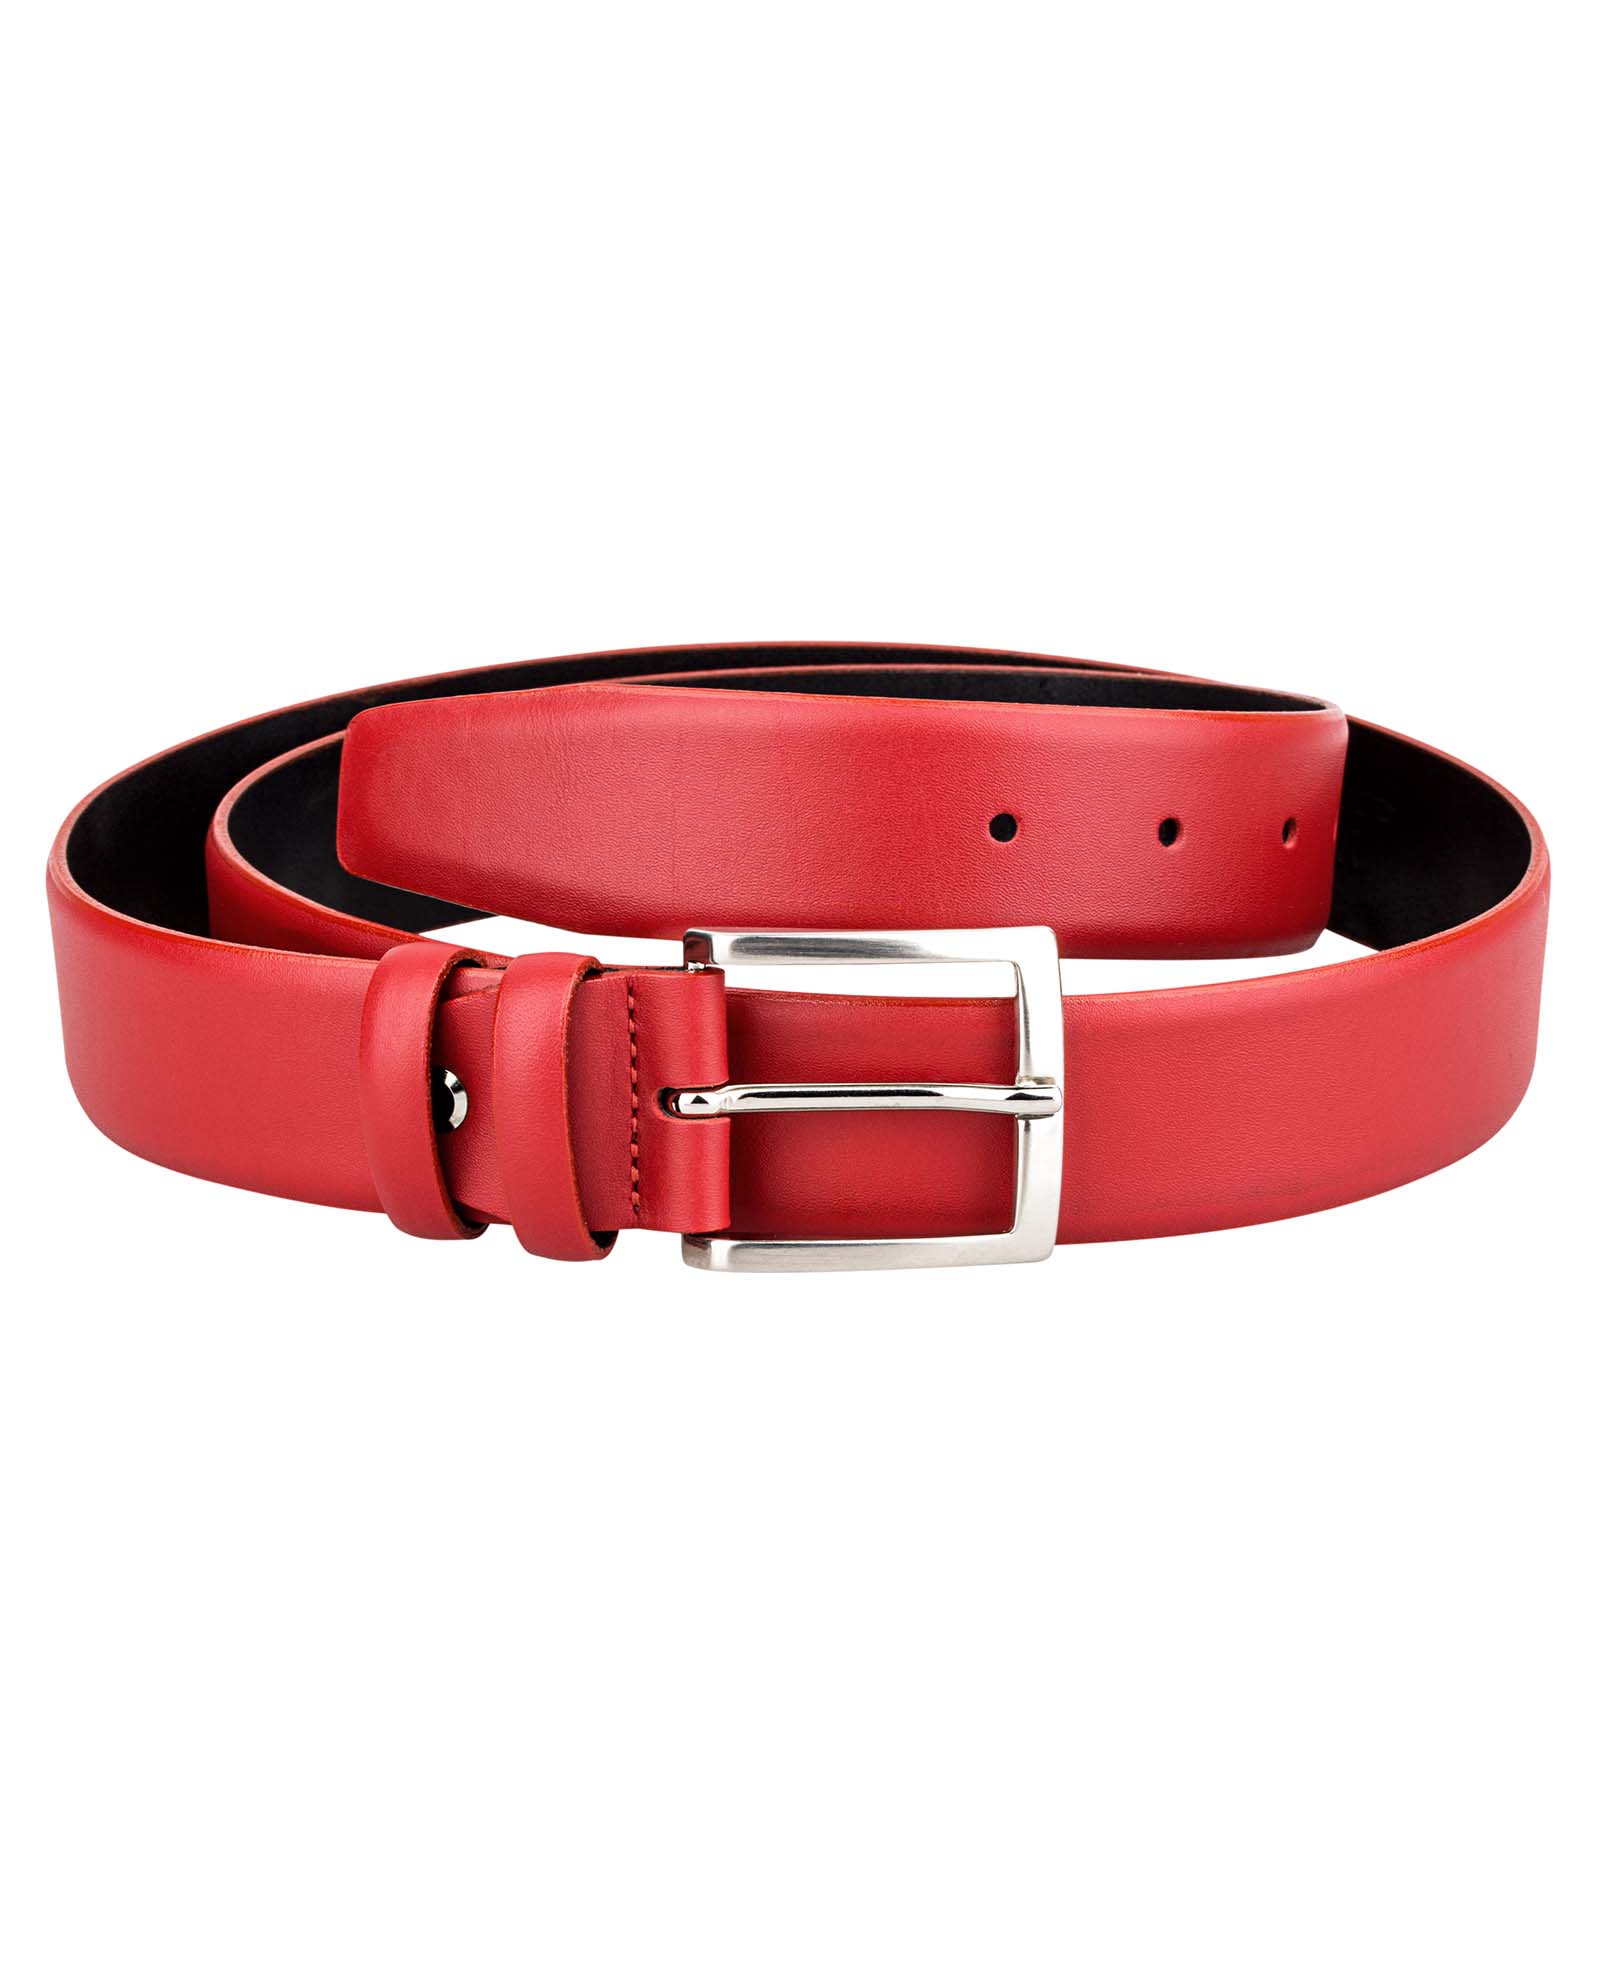 Womens Red Belt Front Picture 